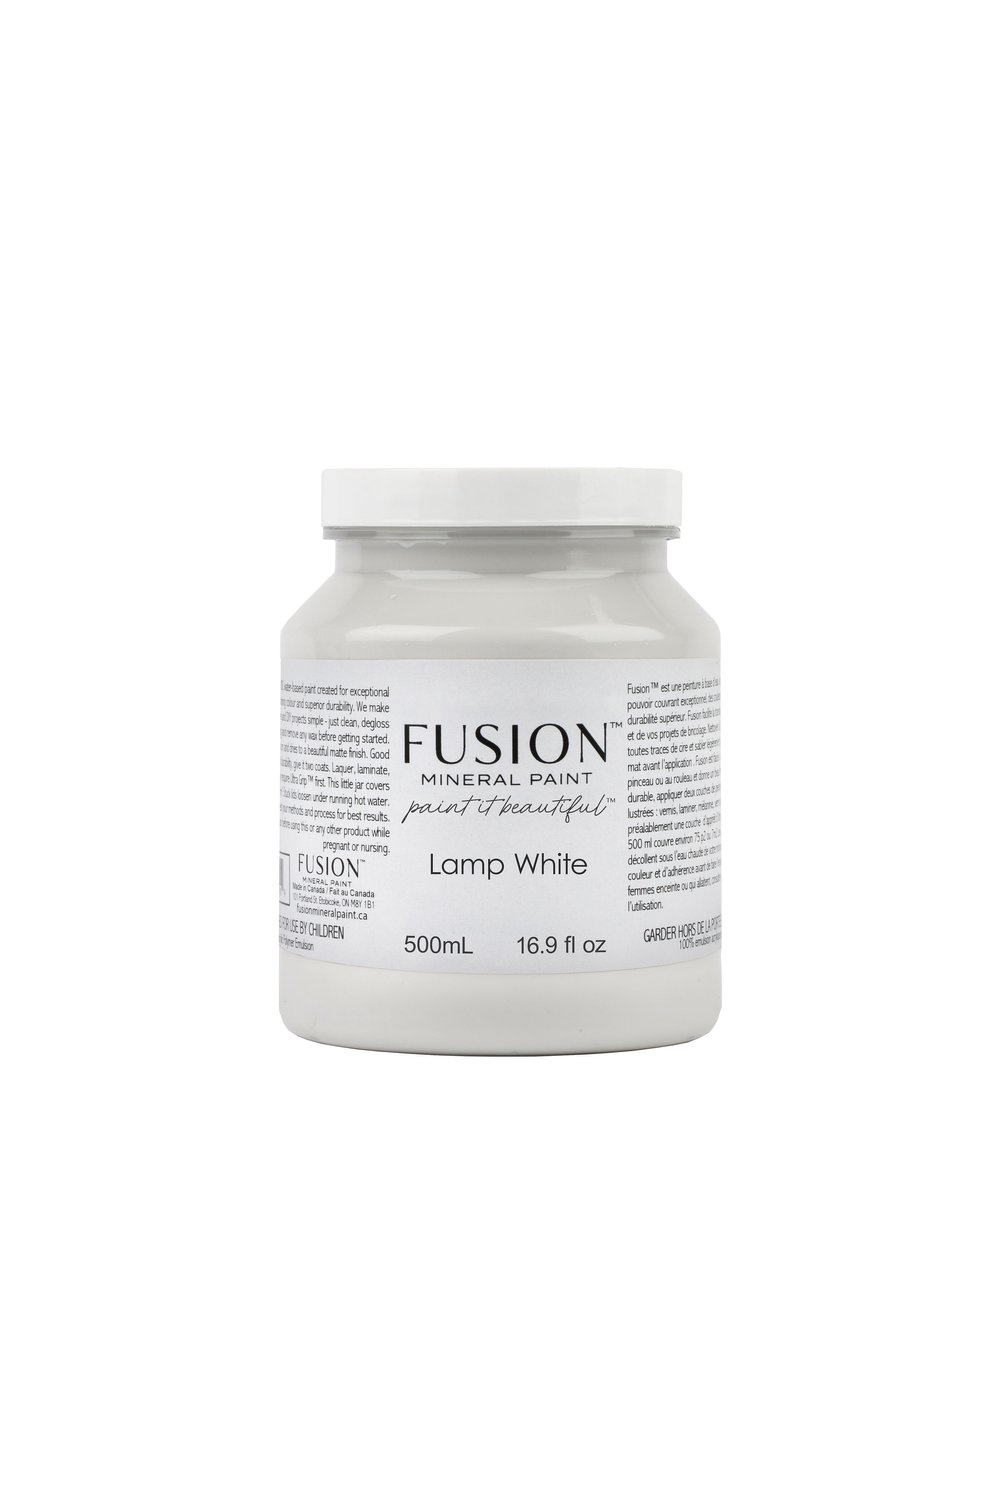 Bliss Ranch: Fusion Mineral Paint